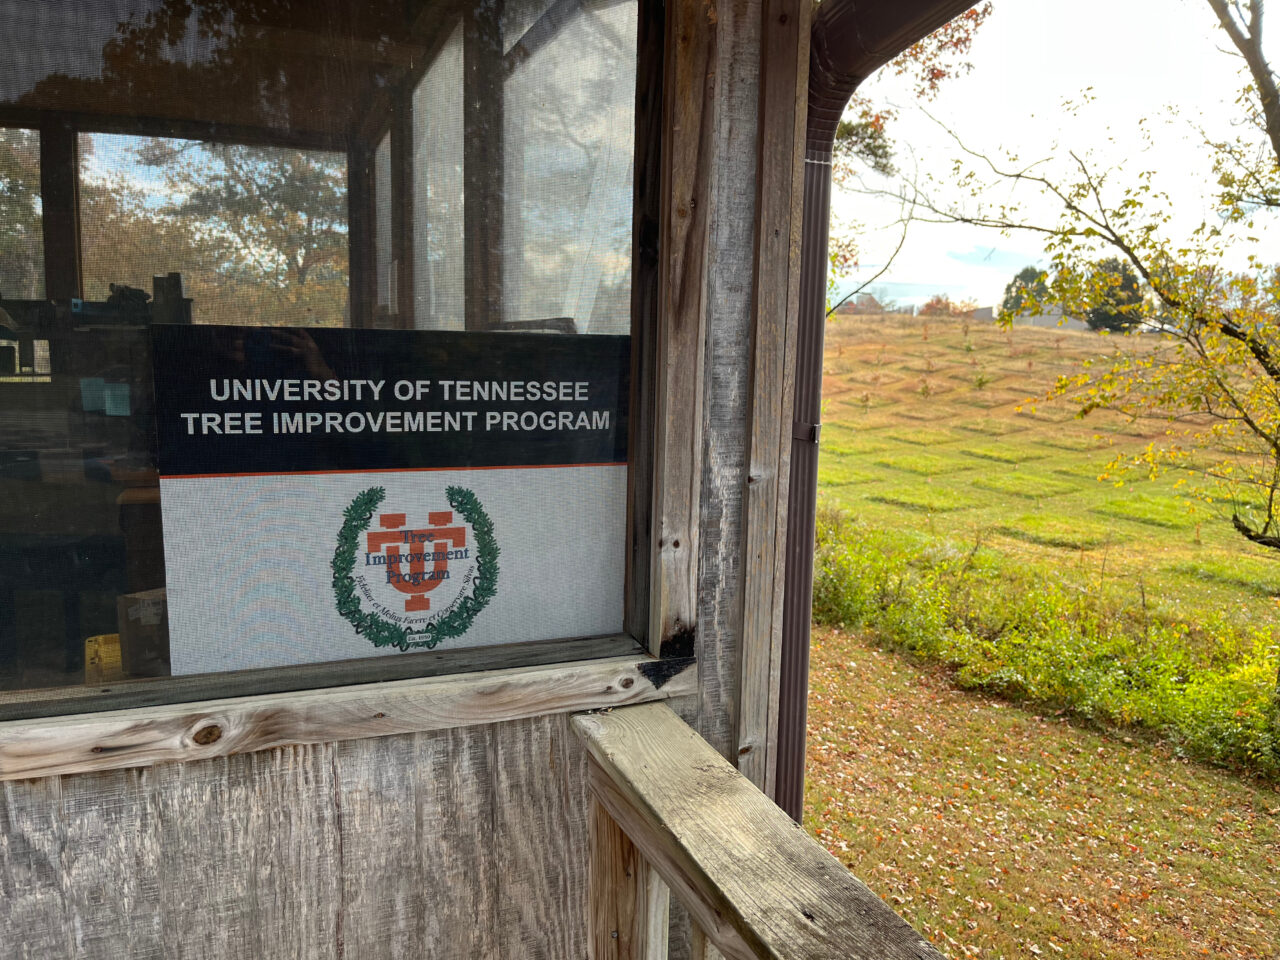 The UT Tree Improvement Program Logo sign sits behind a screen at the program's site.